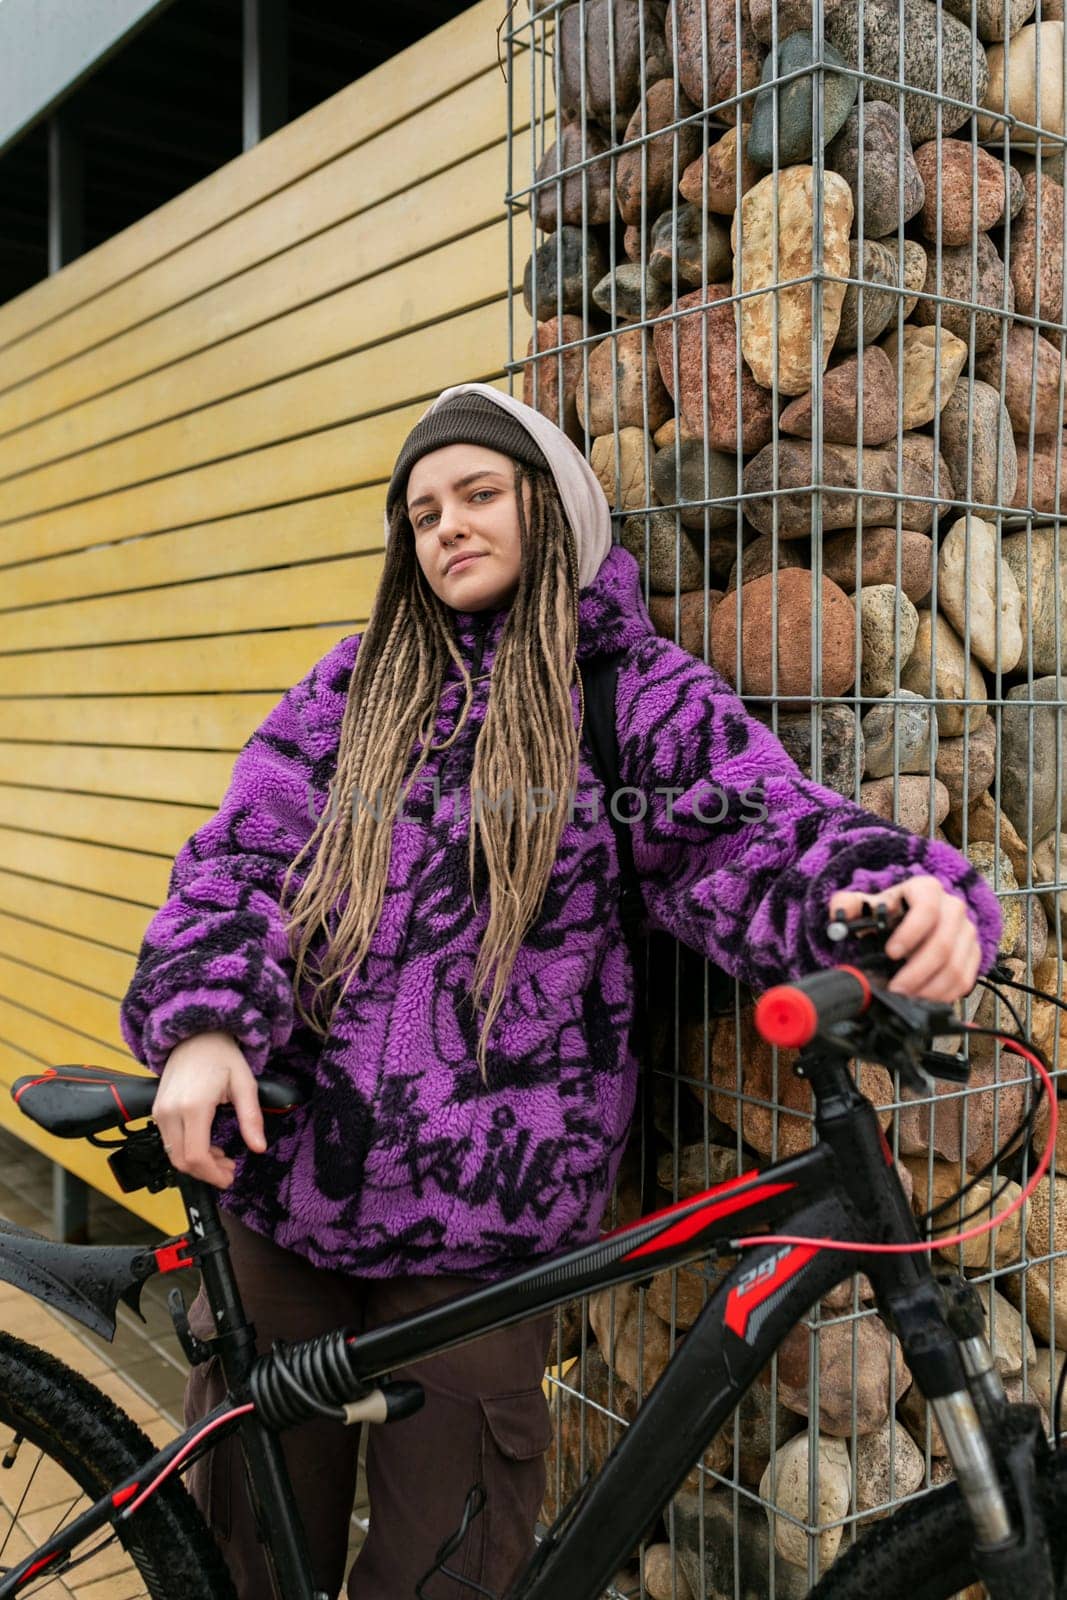 Cute young woman with piercings and dreadlocks rented a bike around the city.